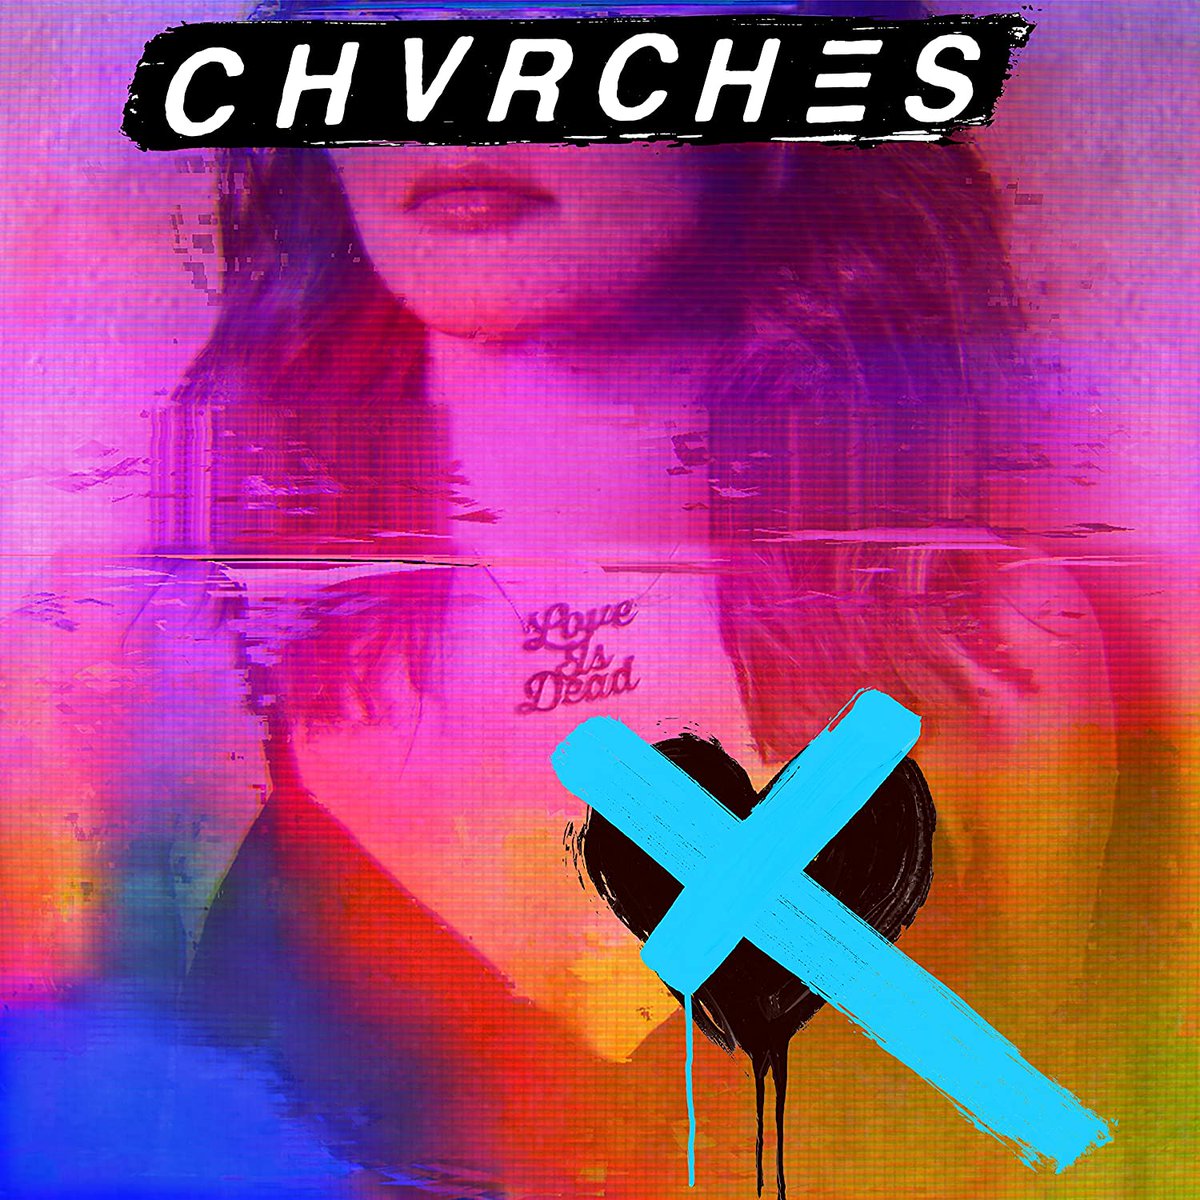 ⌛ On this day, in @CHVRCHES history...

On May 25, 2018, #CHVRCHES released their third studio album, #LoveIsDead 🖤

What's your favourite song?

@Iain_A_Cook @laurenevemay @doksan 

#IainCook #LaurenMayberry #MartinDoherty